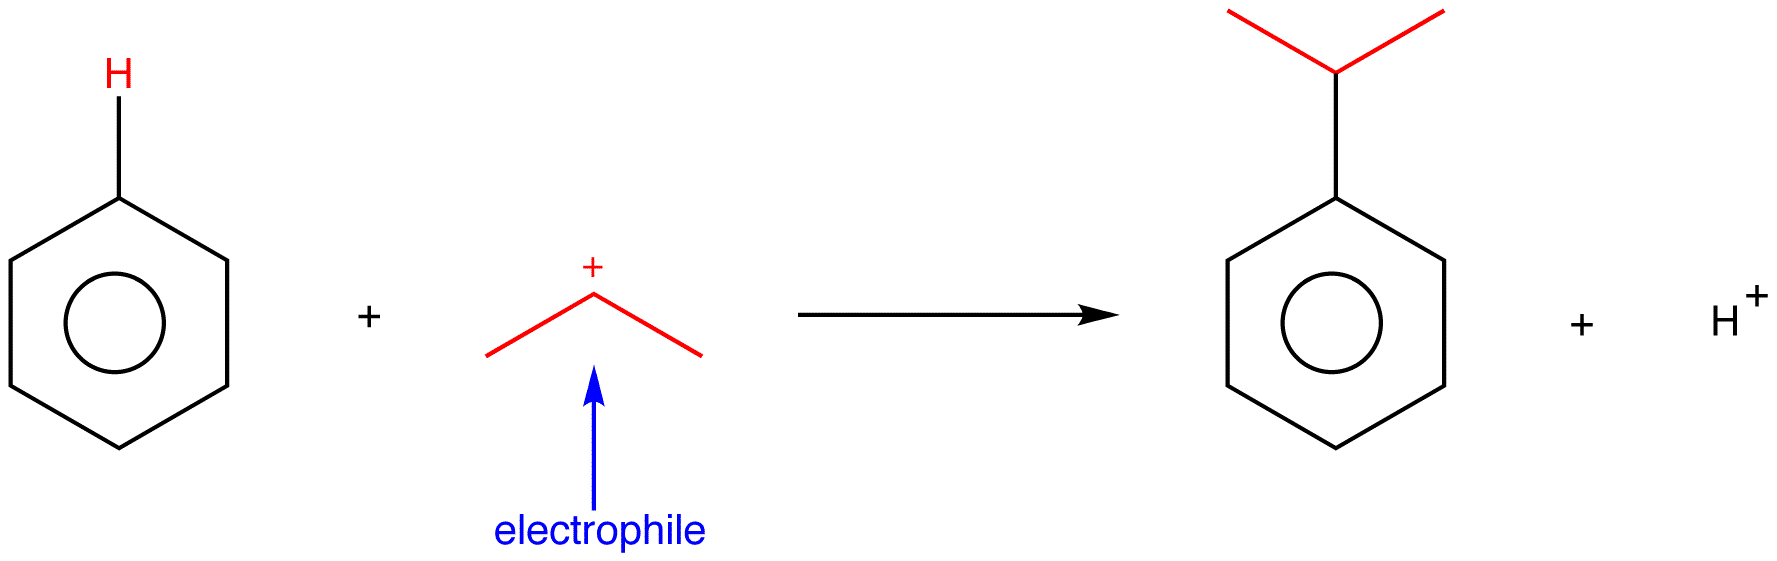 electrophilicsubstitution5.png